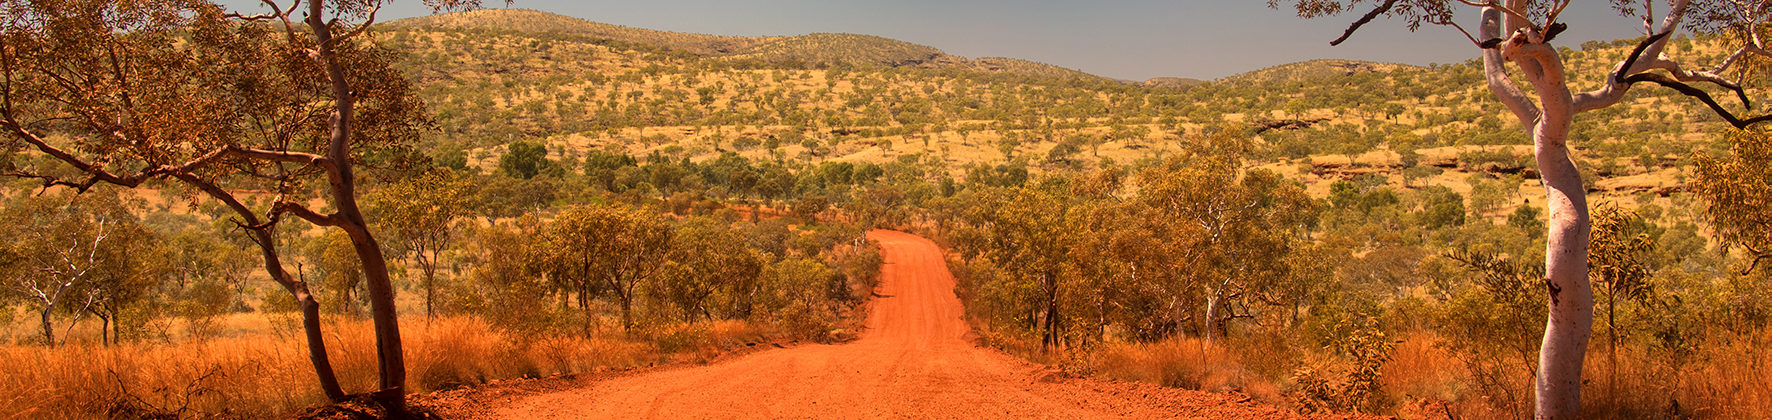 A red dirt track in an Australian outback setting